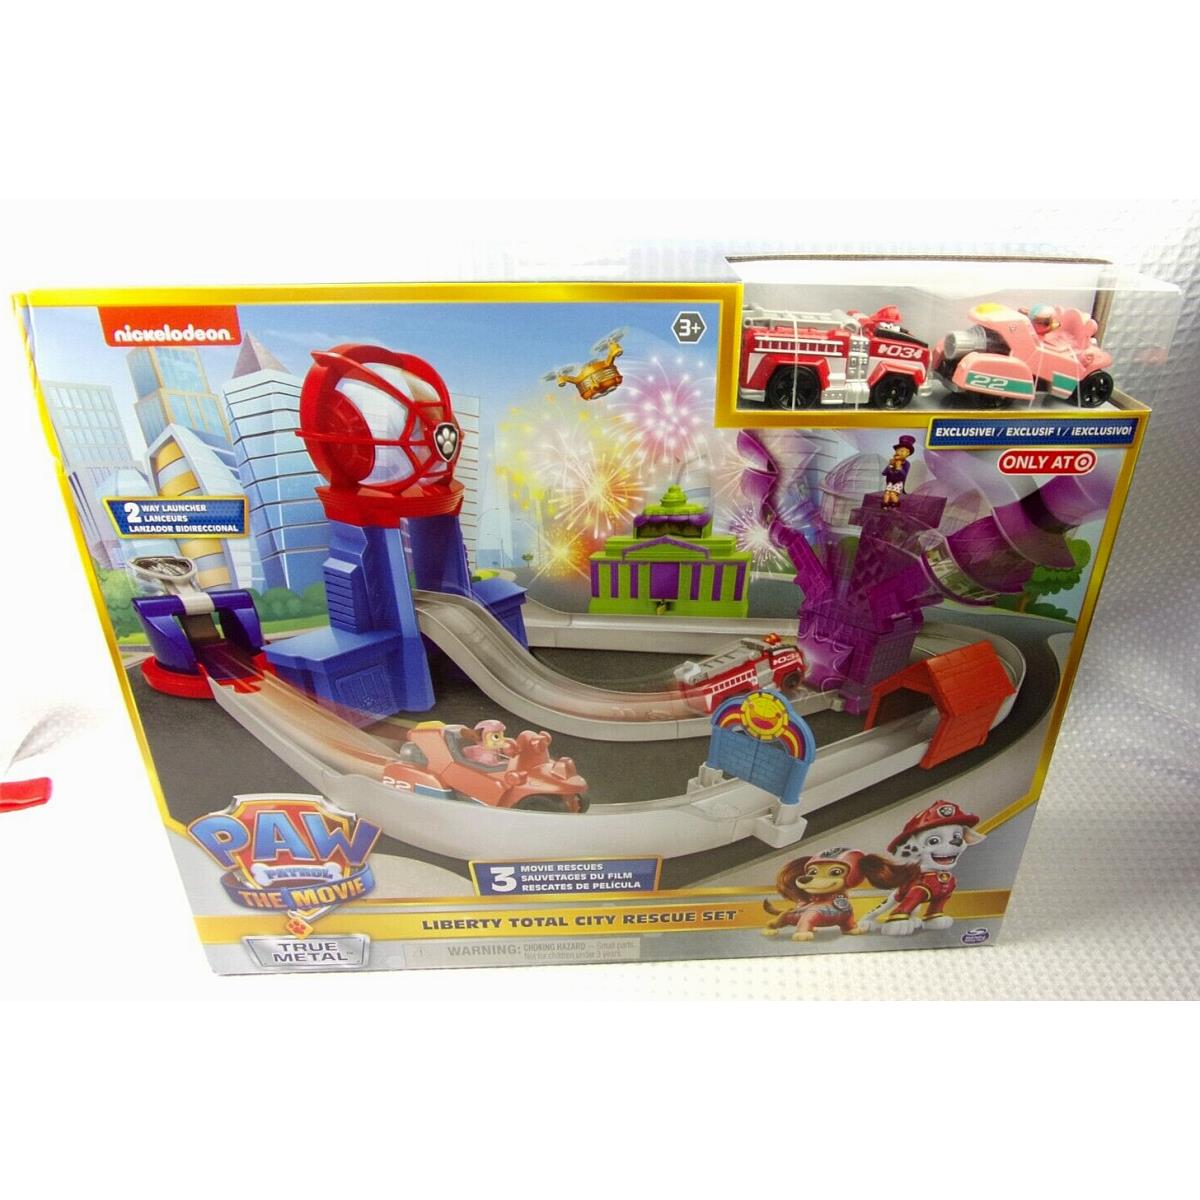 Paw Patrol: The Movie Liberty Total City Rescue Set Diecast Marshall Liberty Exc